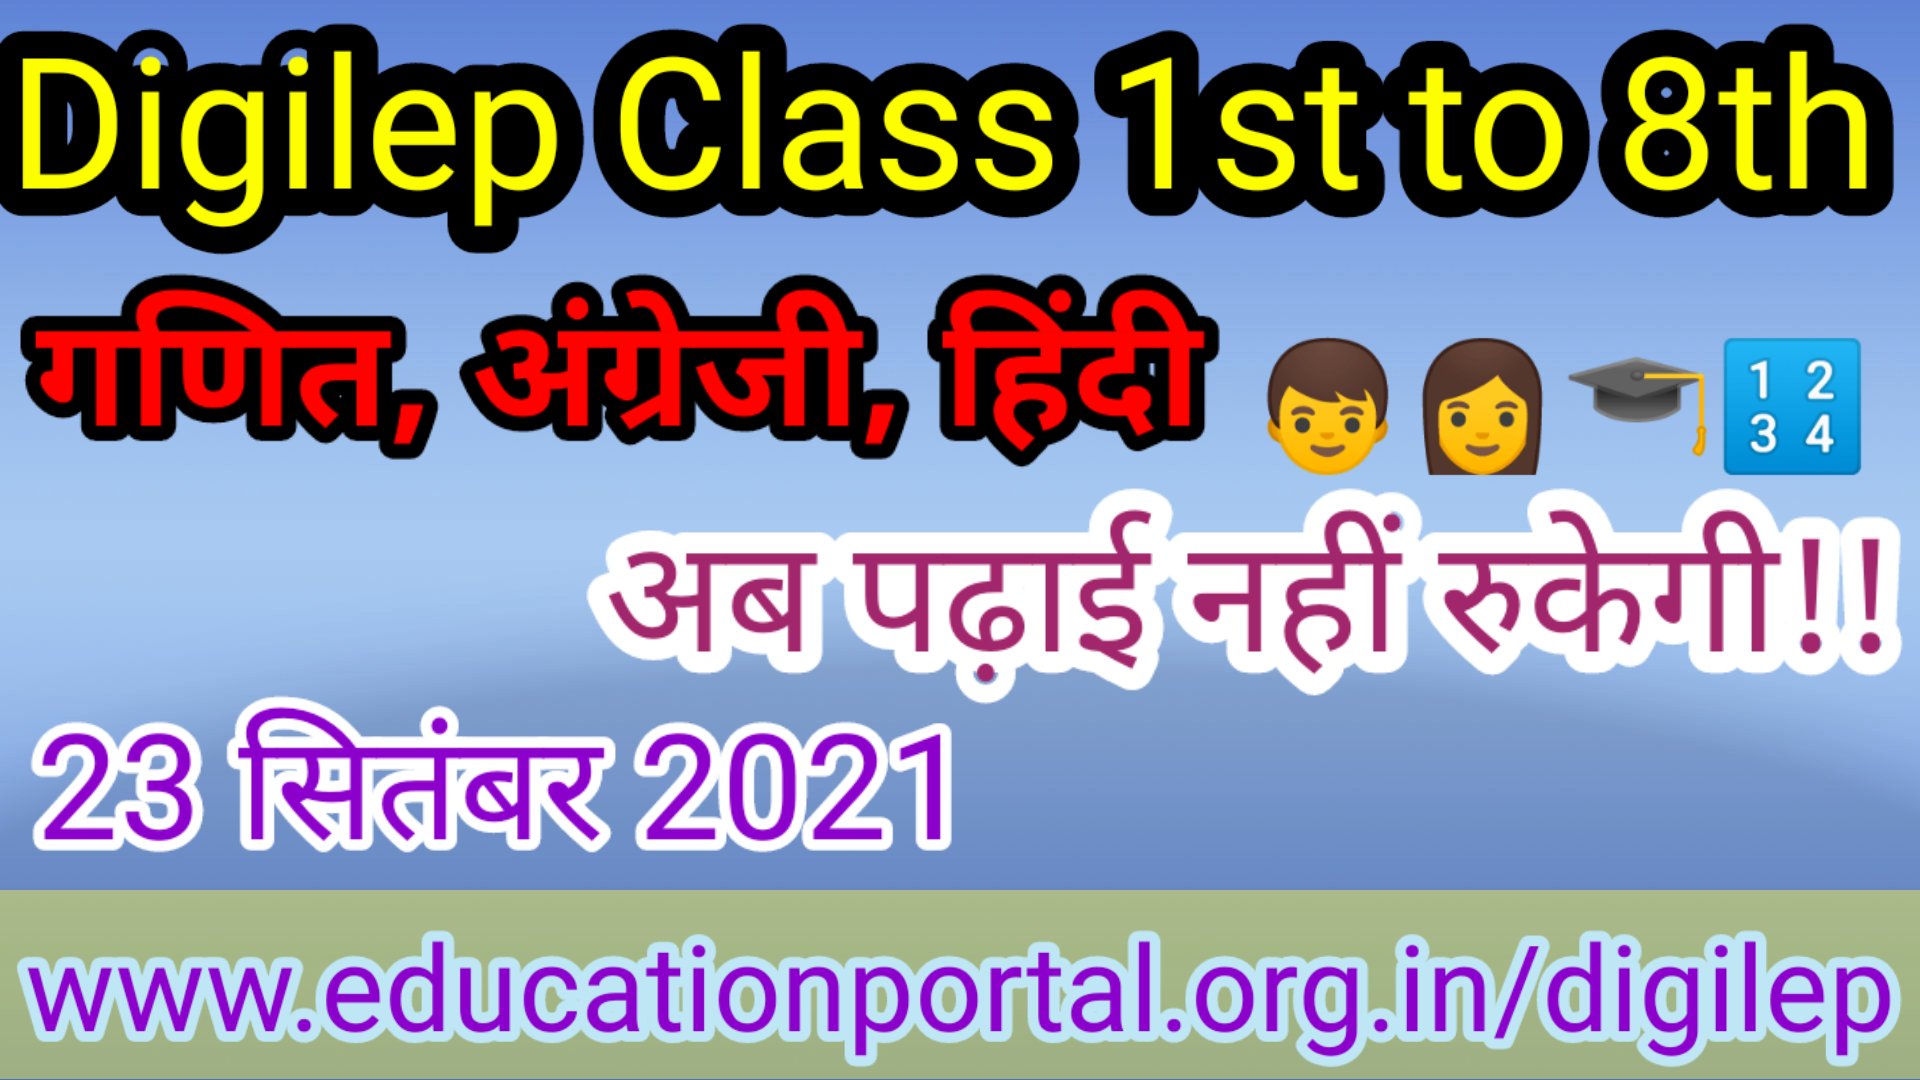 Digilep Class 1st to 8th 23 September 2021